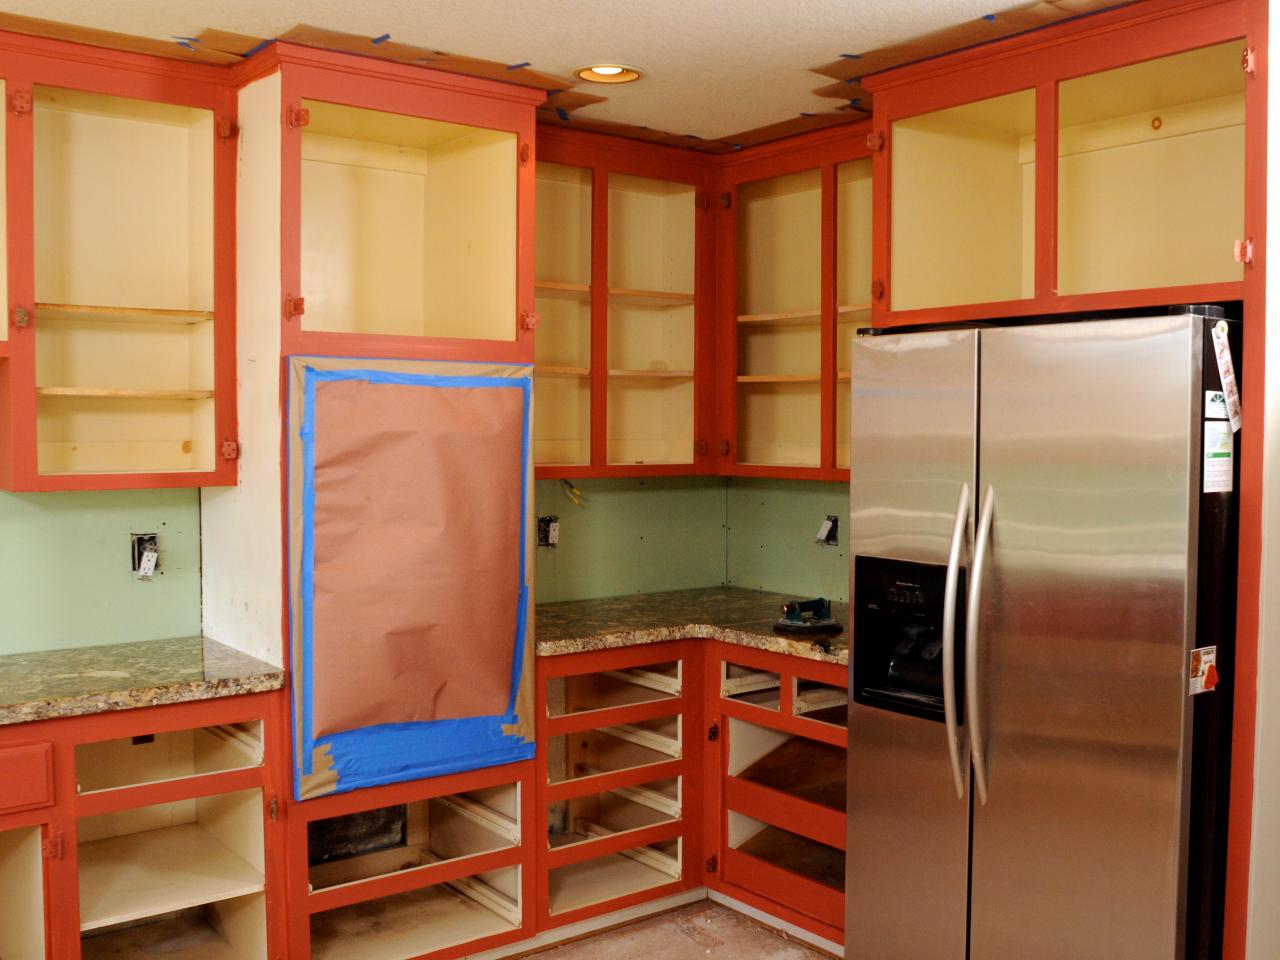 How To Paint Kitchen Cabinets In A Two, Can You Just Paint Over Stained Cabinets